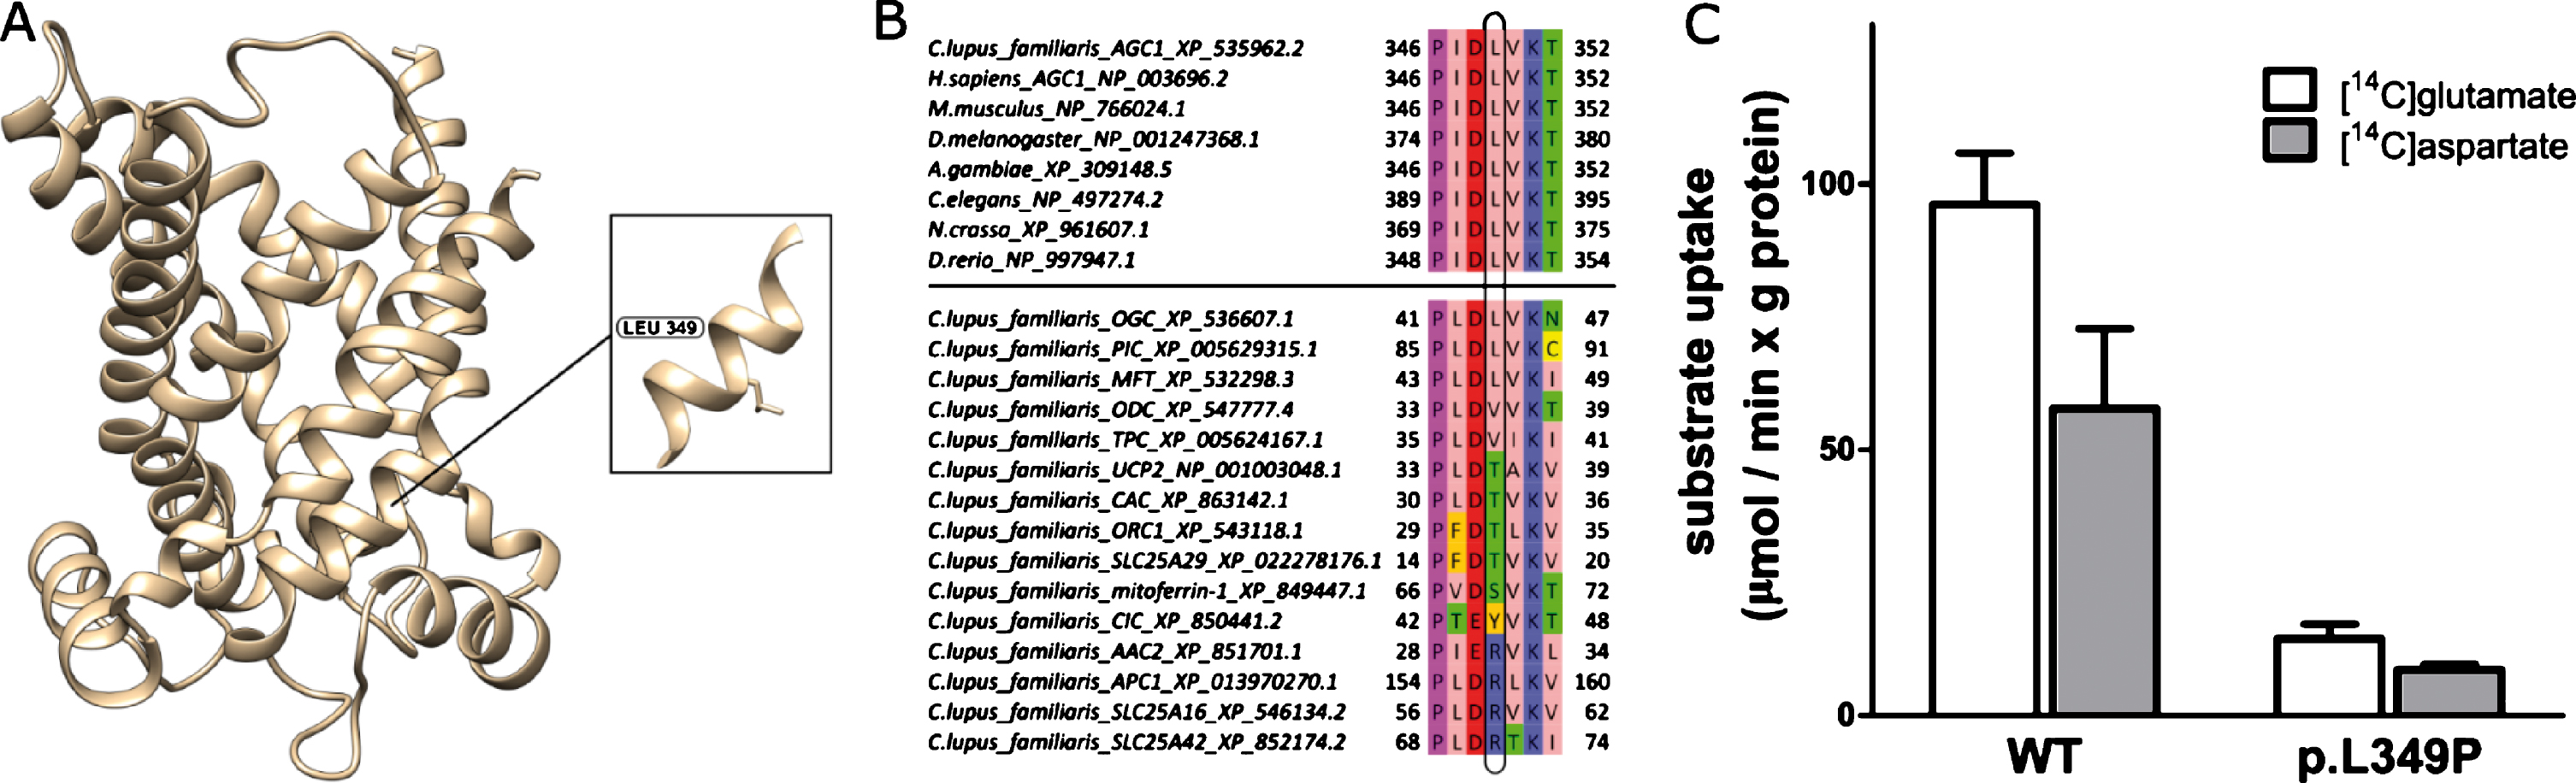 Biochemical and bioinformatic analysis of the SLC25A12 variant. A. Structural homology model of the C. lupus C-terminal domain of the mitochondrial aspartate/glutamate carrier 1 (AGC1). The amino acid position of Leu349 that is mutated in Pro is shown in the box. B. Sequence alignment of AGC1 from different organisms (upper panel) and other members of the mitochondrial carrier family in Canis lupus familiaris (lower panel). C. Functional characterization of wild-type (WT) and mutated AGC1 form. The uptake rate of (14C) glutamate or (14C) aspartate was measured by adding 1 mM of radiolabeled glutamate or aspartate to liposomes reconstituted with purified WT AGC or with the mutant p.L349P and containing 20 mM of glutamate. The transport reaction was terminated after 1 min by adding 20mM pyridoxal 5′-phosphate and bathophenanthroline. The means and SDs from three independent experiments are shown.